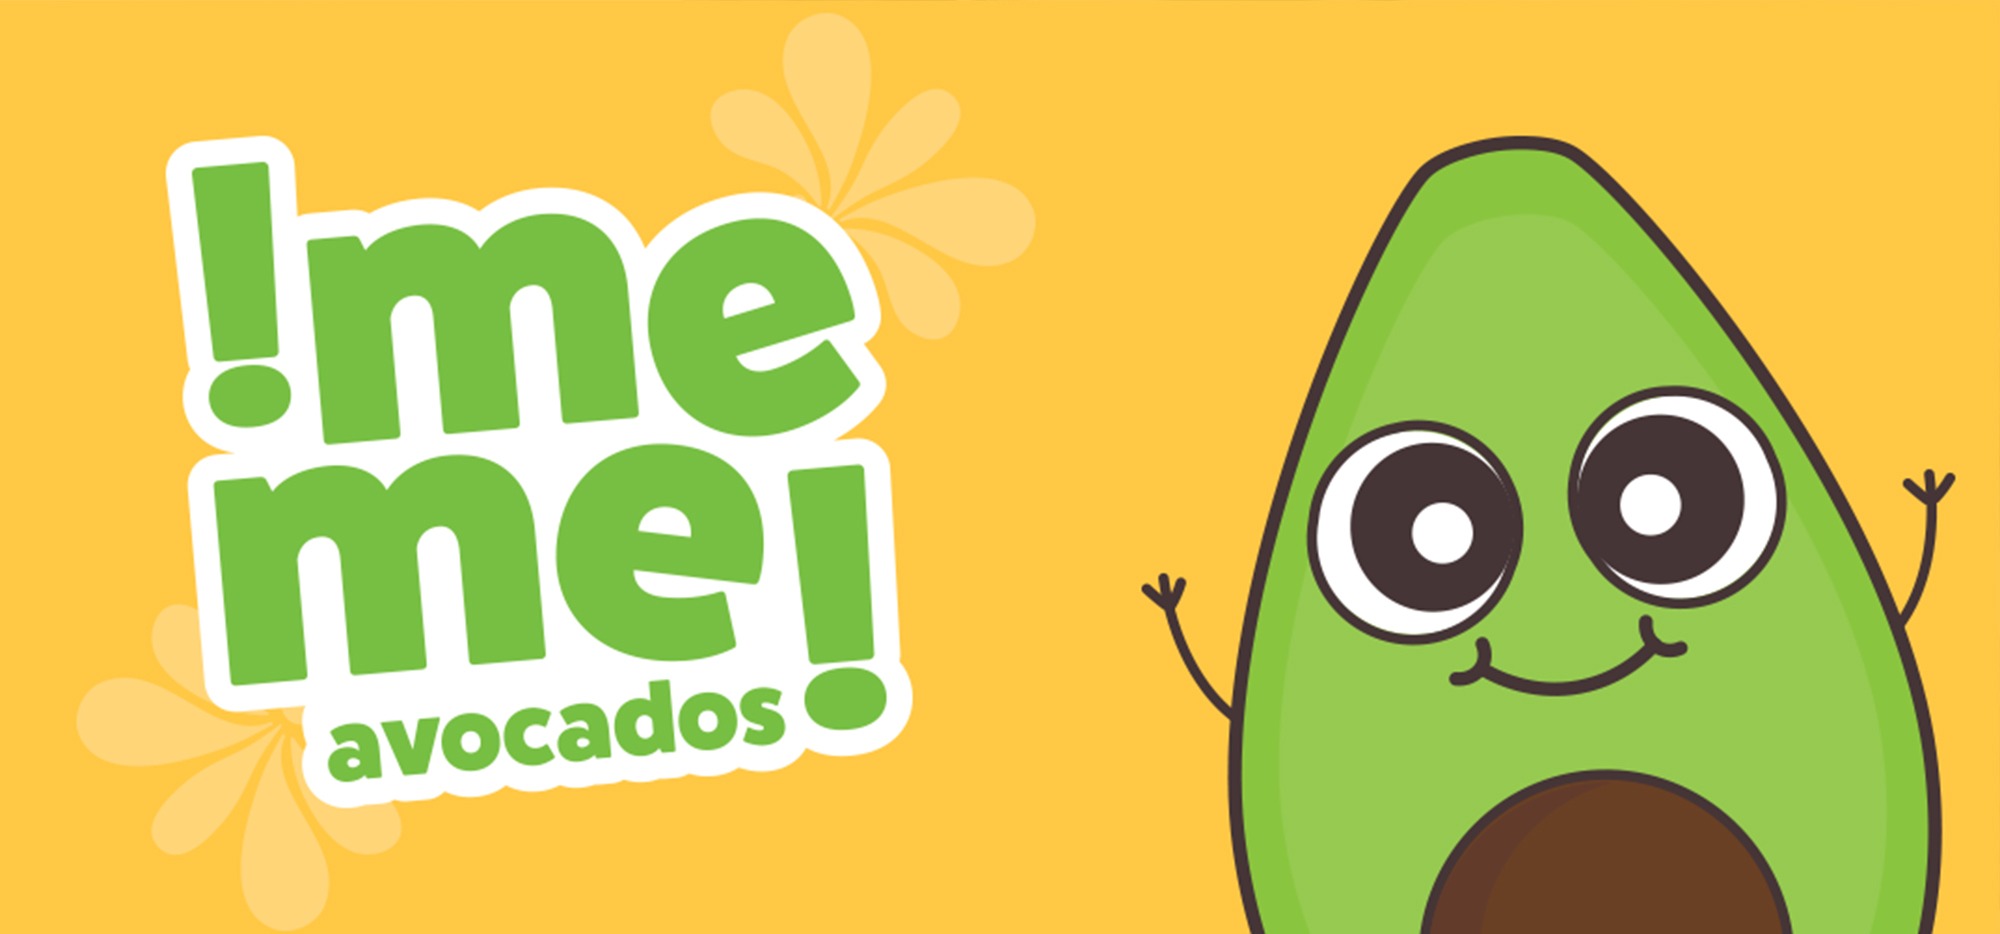 Me Me Avocados Logo Design and Character Design by Octane Advertising Design